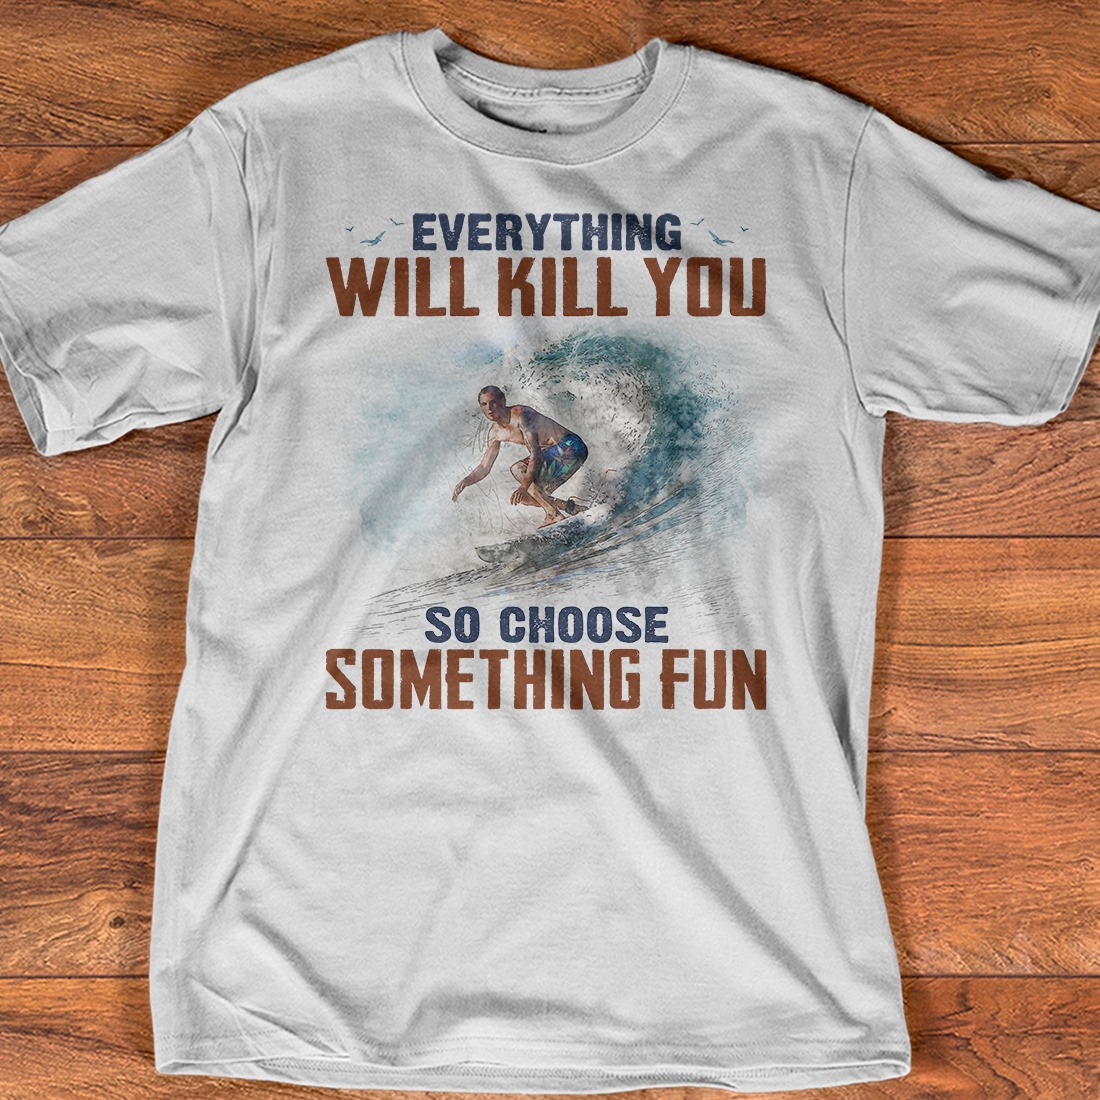 Everything will kill you so choose something fun - Wave surfing